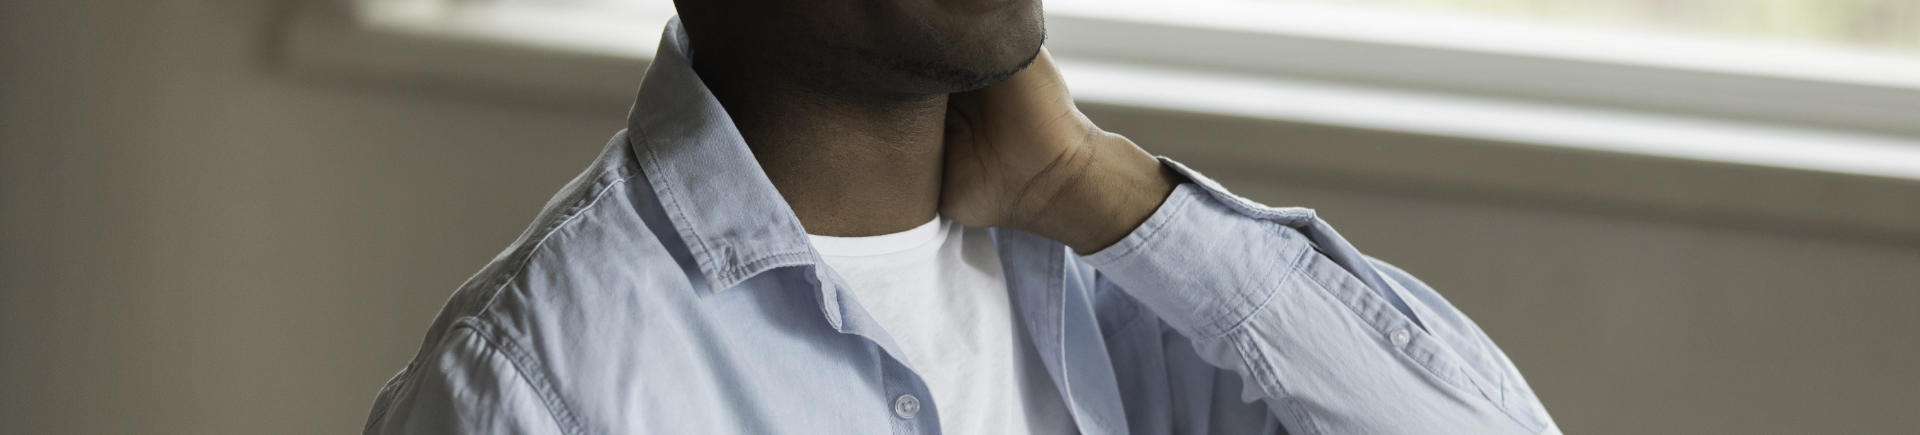 Man with neck pain seeking pinched nerve relief treatment